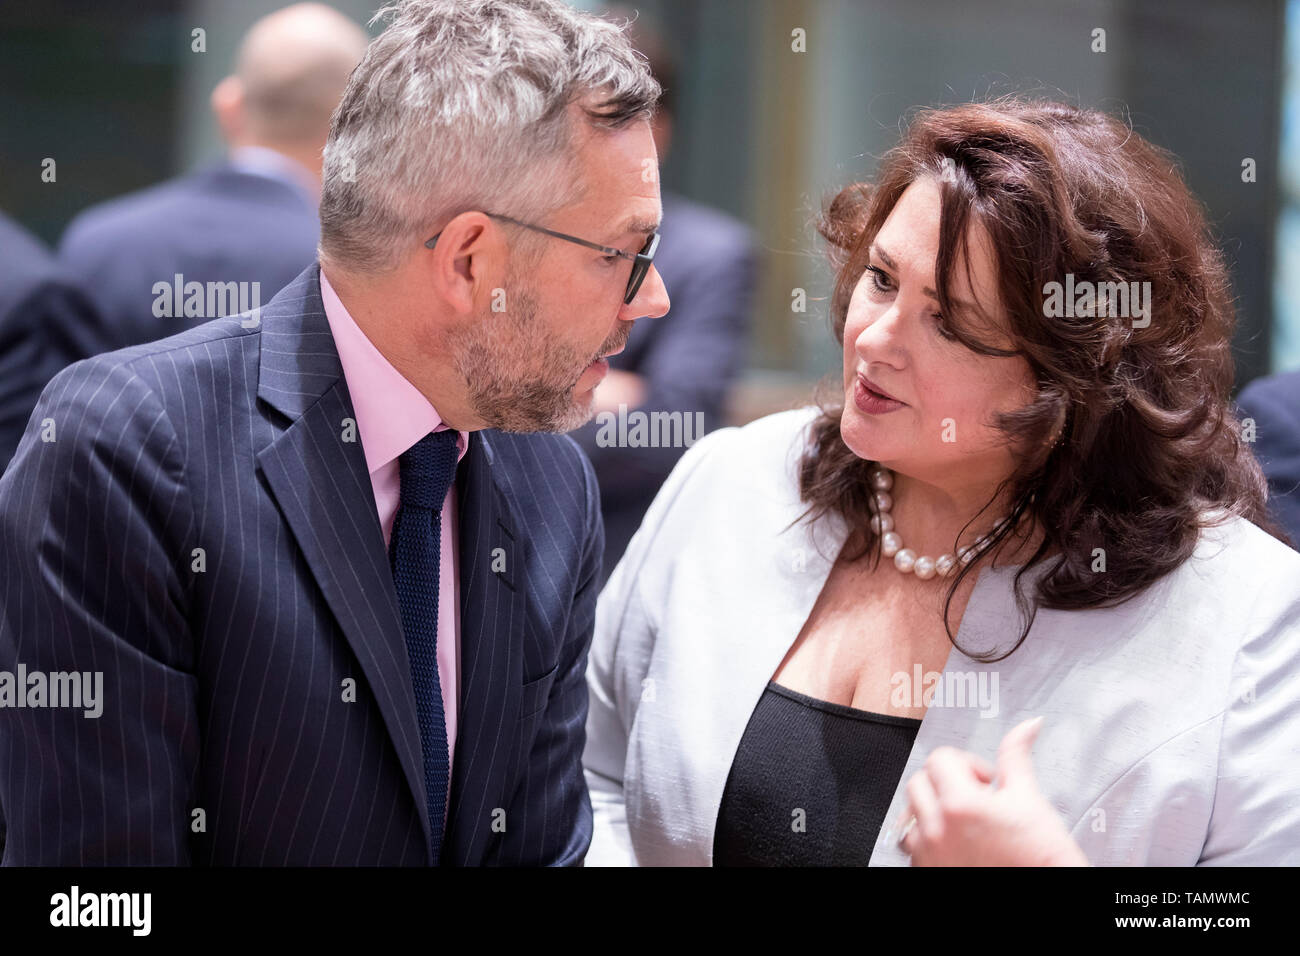 21 May 2019, Belgium, Brüssel: 21.05.2019, Belgium, Brussels: The German Minister of State for Europe, Michael Roth (L), will speak with the Maltese Minister for European Affairs and Equality, Helena Dalli (R), before the start of a meeting of EU Ministers for General Affairs on 21 May 2019 in the Europa building in Brussels. The General Affairs Council coordinates preparations for European Council meetings. It is also responsible for a number of overarching policy areas. The GAC is essentially composed of the Ministers for European Affairs of all EU Member States. The European Commission is u Stock Photo